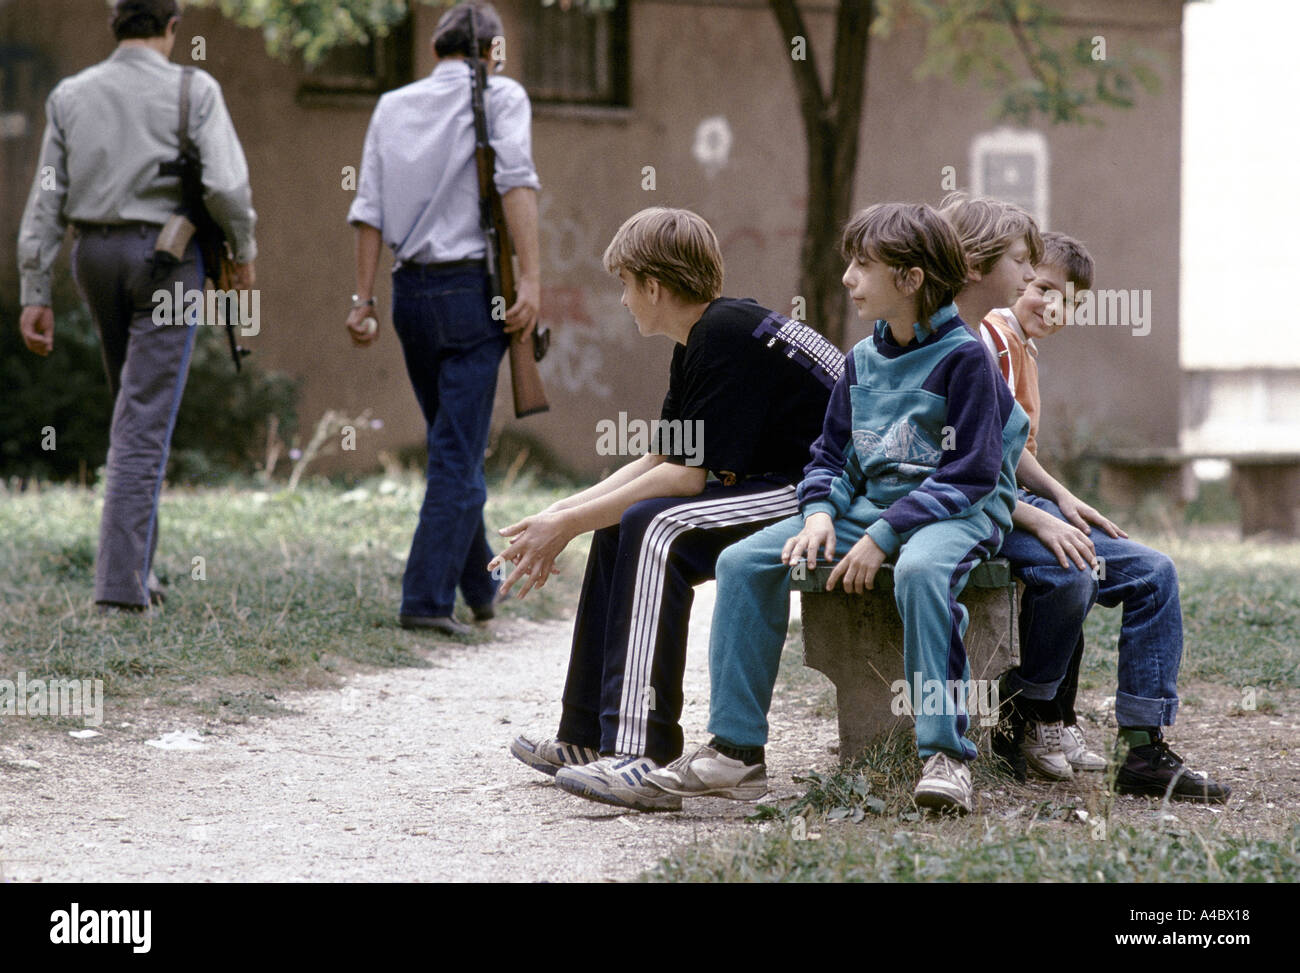 Men with machine guns walking past group of children sitting on a public bench in the Serb-controlled area of Grbavica, Sarajevo Stock Photo